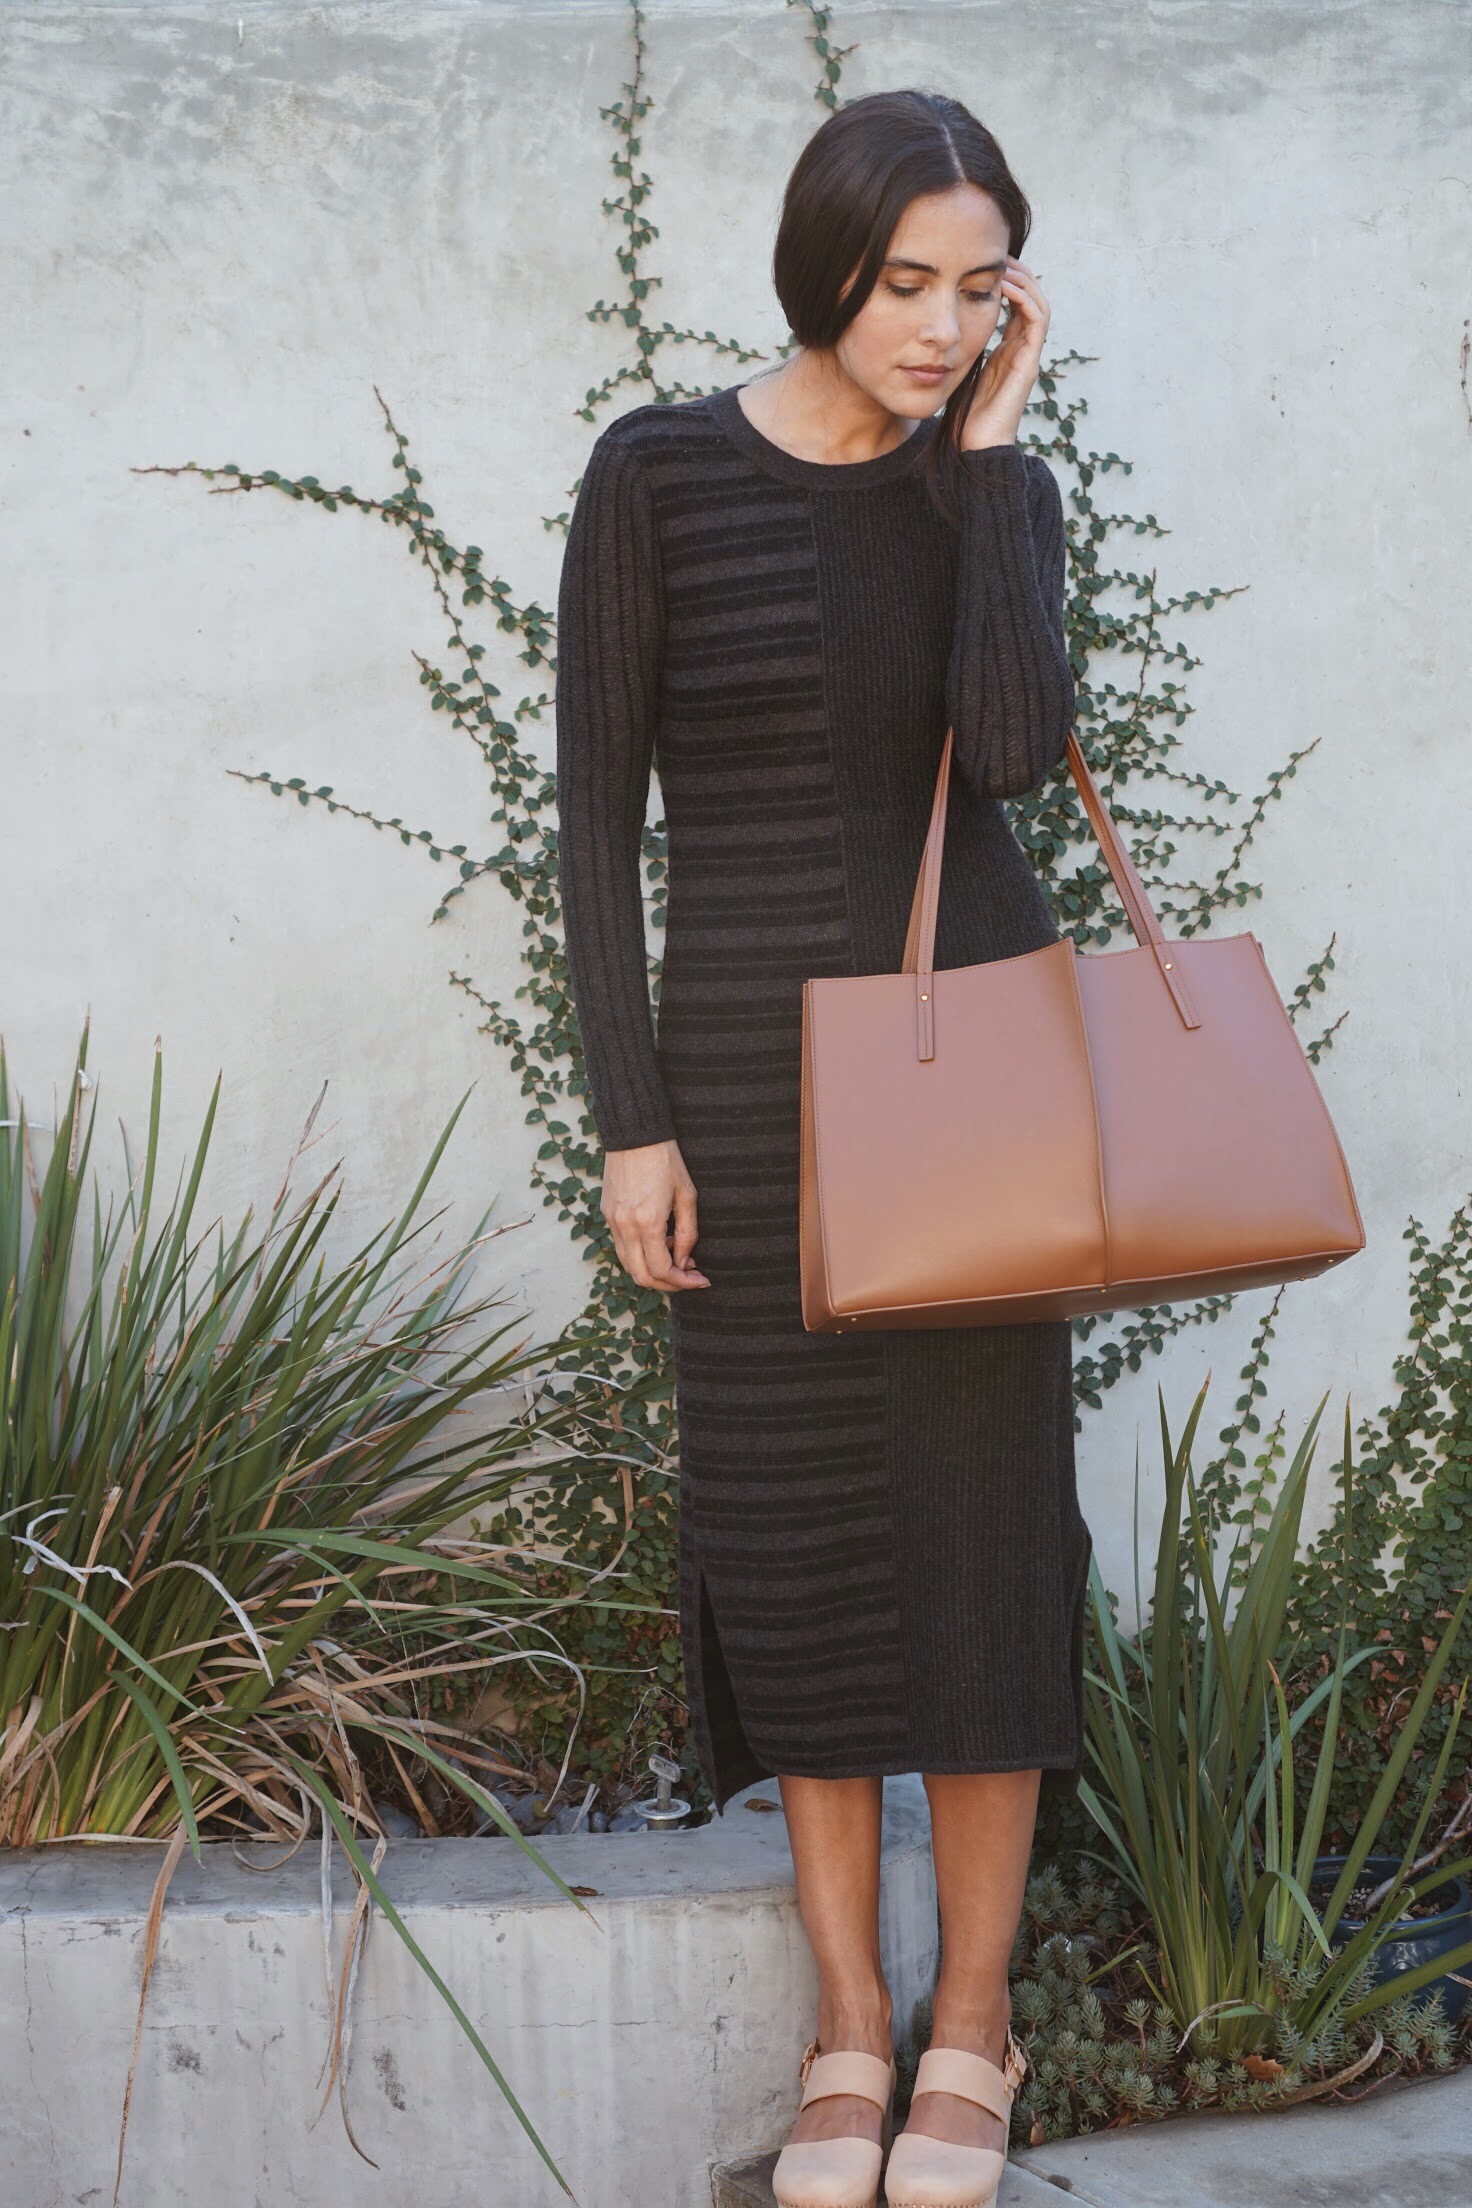   Maiyet &nbsp;Knit Stripe Sheath Dress in Blk/Ch +  Maiyet  Sia East/West in Cognac +   Zuzii   Closed Toe Clogs in Natural. 